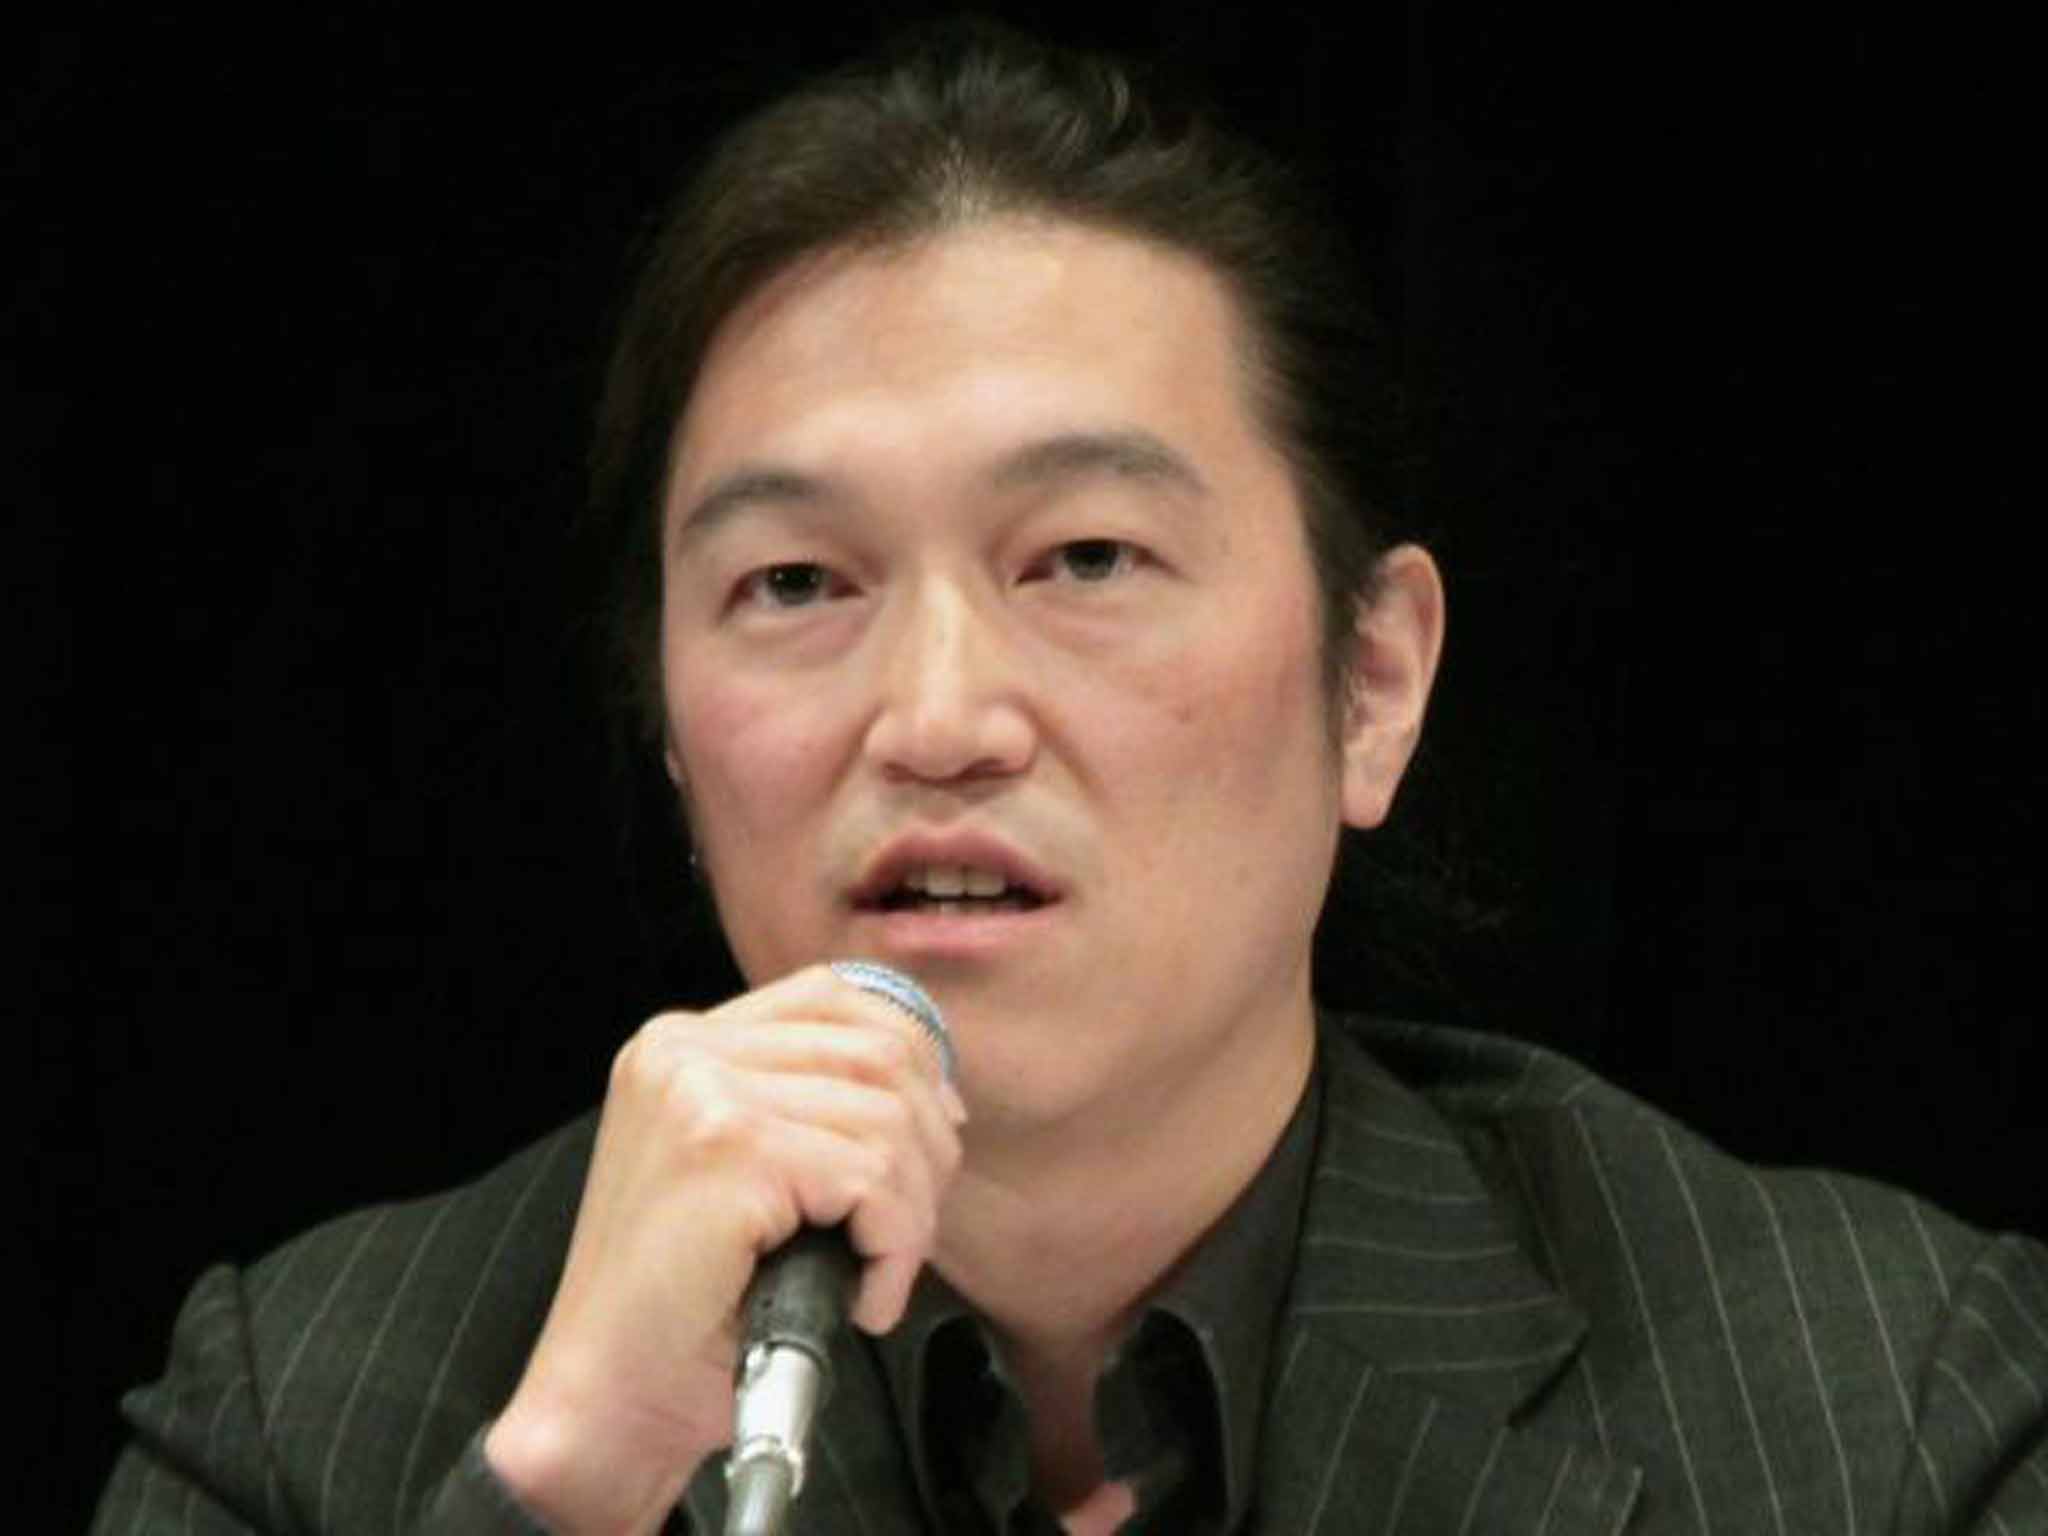 Goto delivers a lecture to a symposium in Tokyo in 2010: he directed attention to conflicts hitherto widely unregarded
in Japan